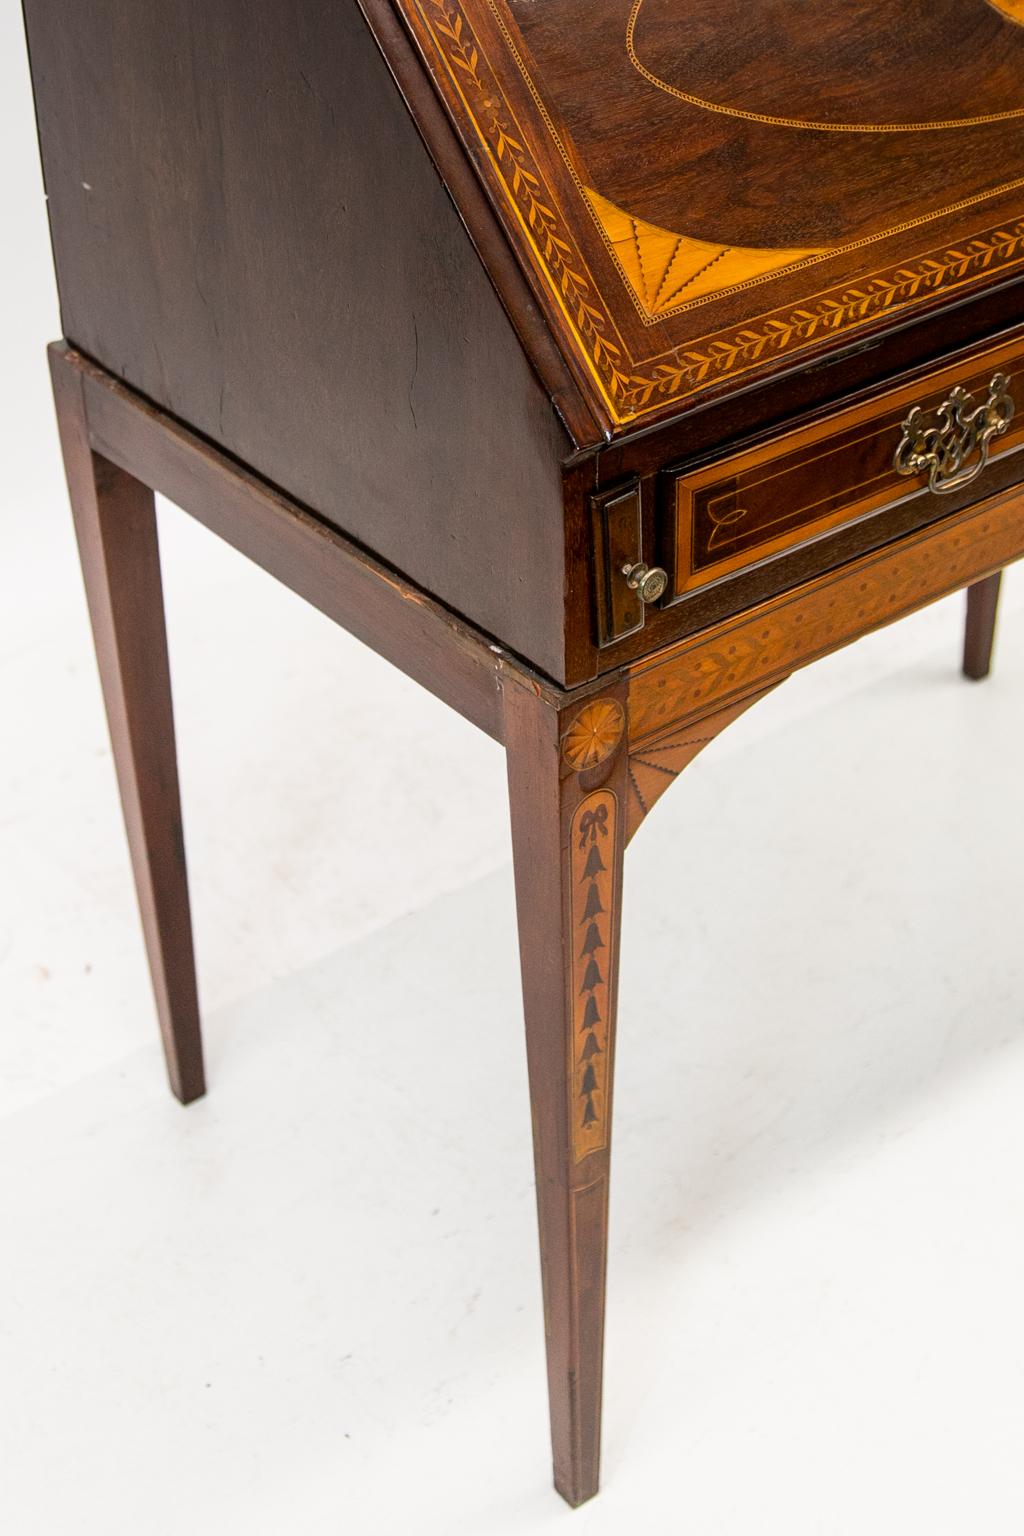 Inlaid English mahogany Hepplewhite Slant front desk on legs. It has quarter fans connected by boxwood string inlay. The fall board is inlaid with leaf and berry border. Ebony and satinwood herringbone inlay surround quarter fans and a central